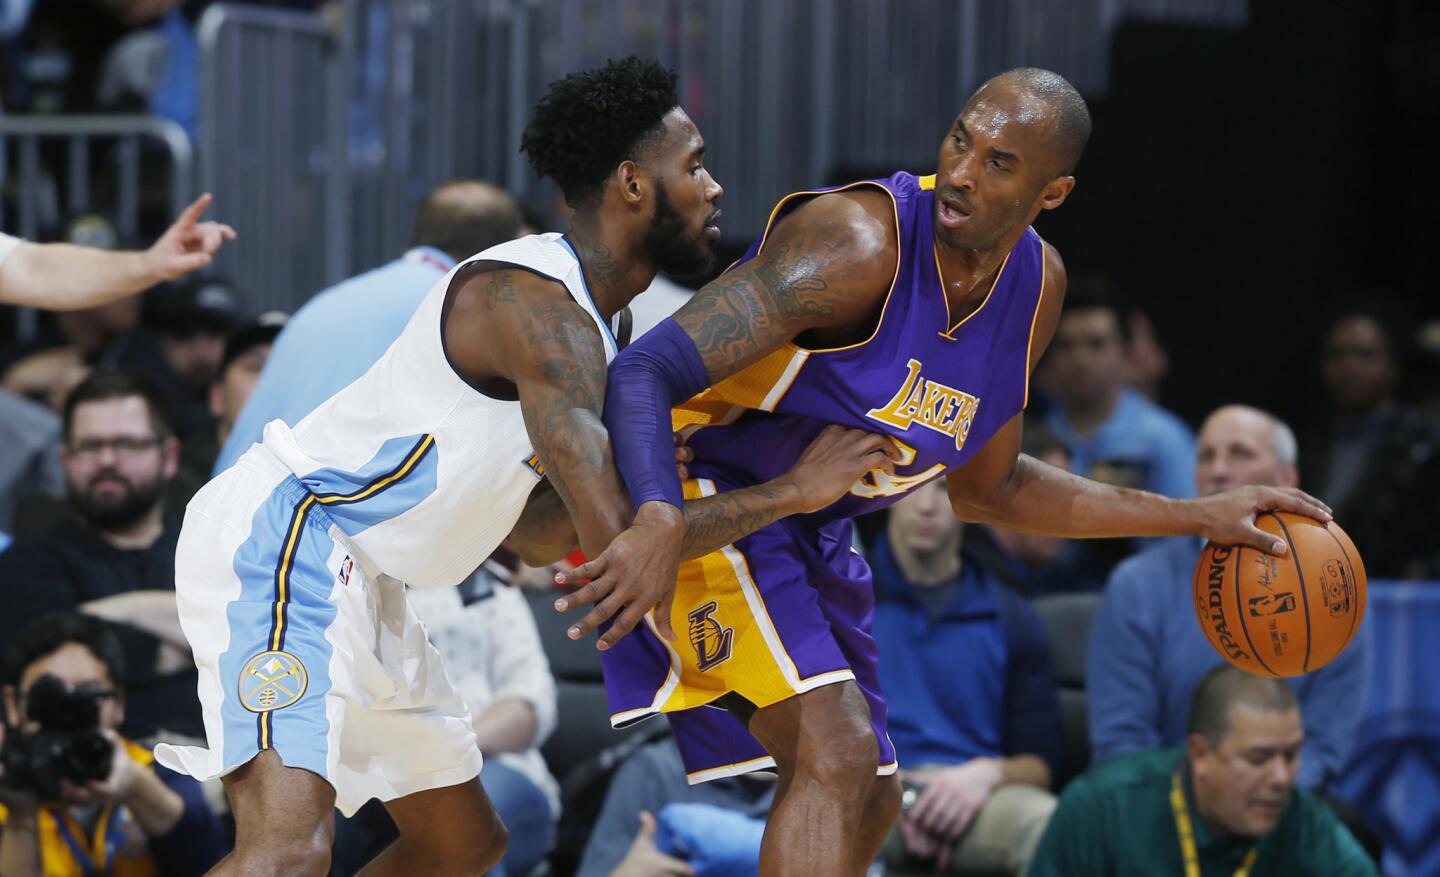 Los Angeles Lakers forward Kobe Bryant, right, works the ball inside for a shot as Denver Nuggets forward Will Barton defends during the second half on Tuesday.